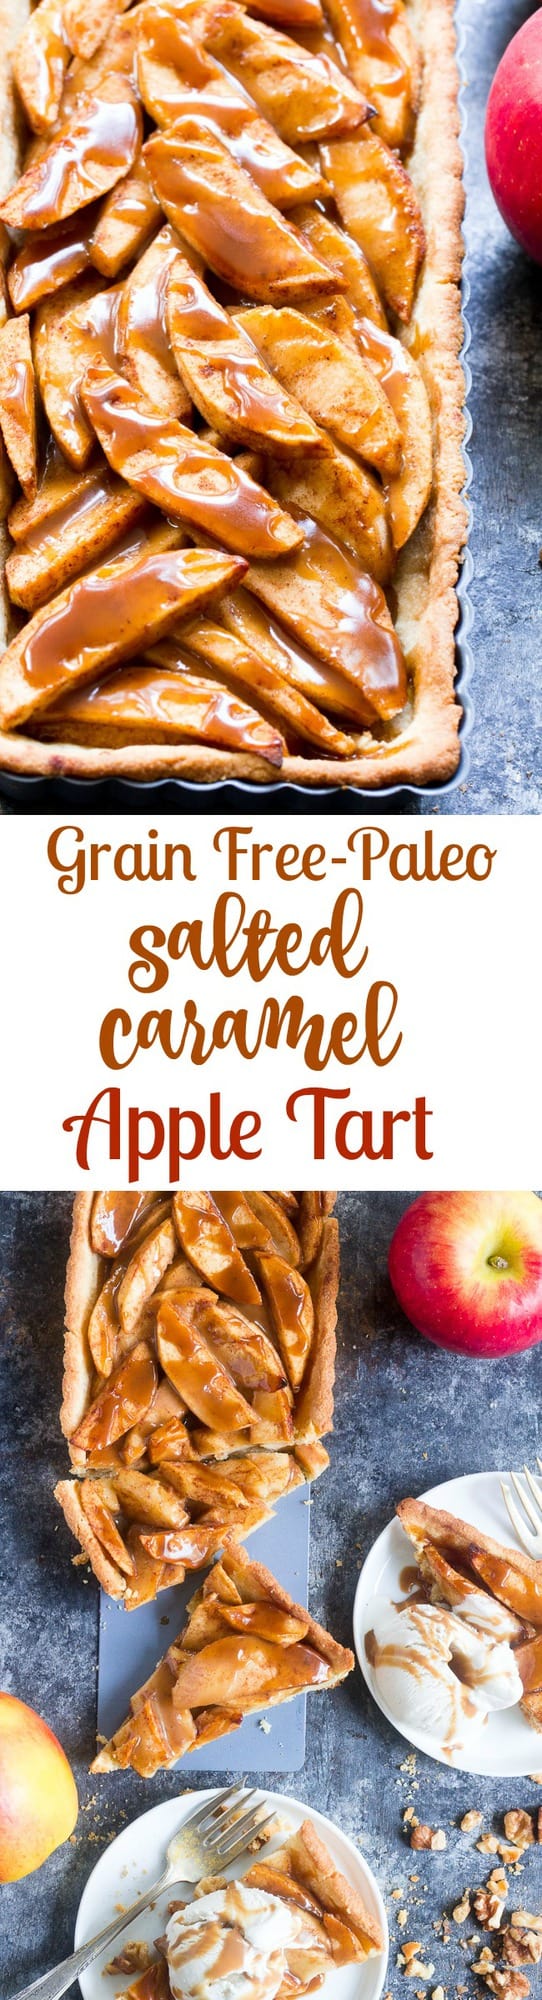 This gorgeous salted caramel apple tart is an irresistible fall dessert and easier than you think!  It begins with a buttery grain free pastry crust filled with juicy apples and topped with an easy dairy free salted caramel sauce.  Gluten free, grain free, dairy-free option, paleo, and family approved!